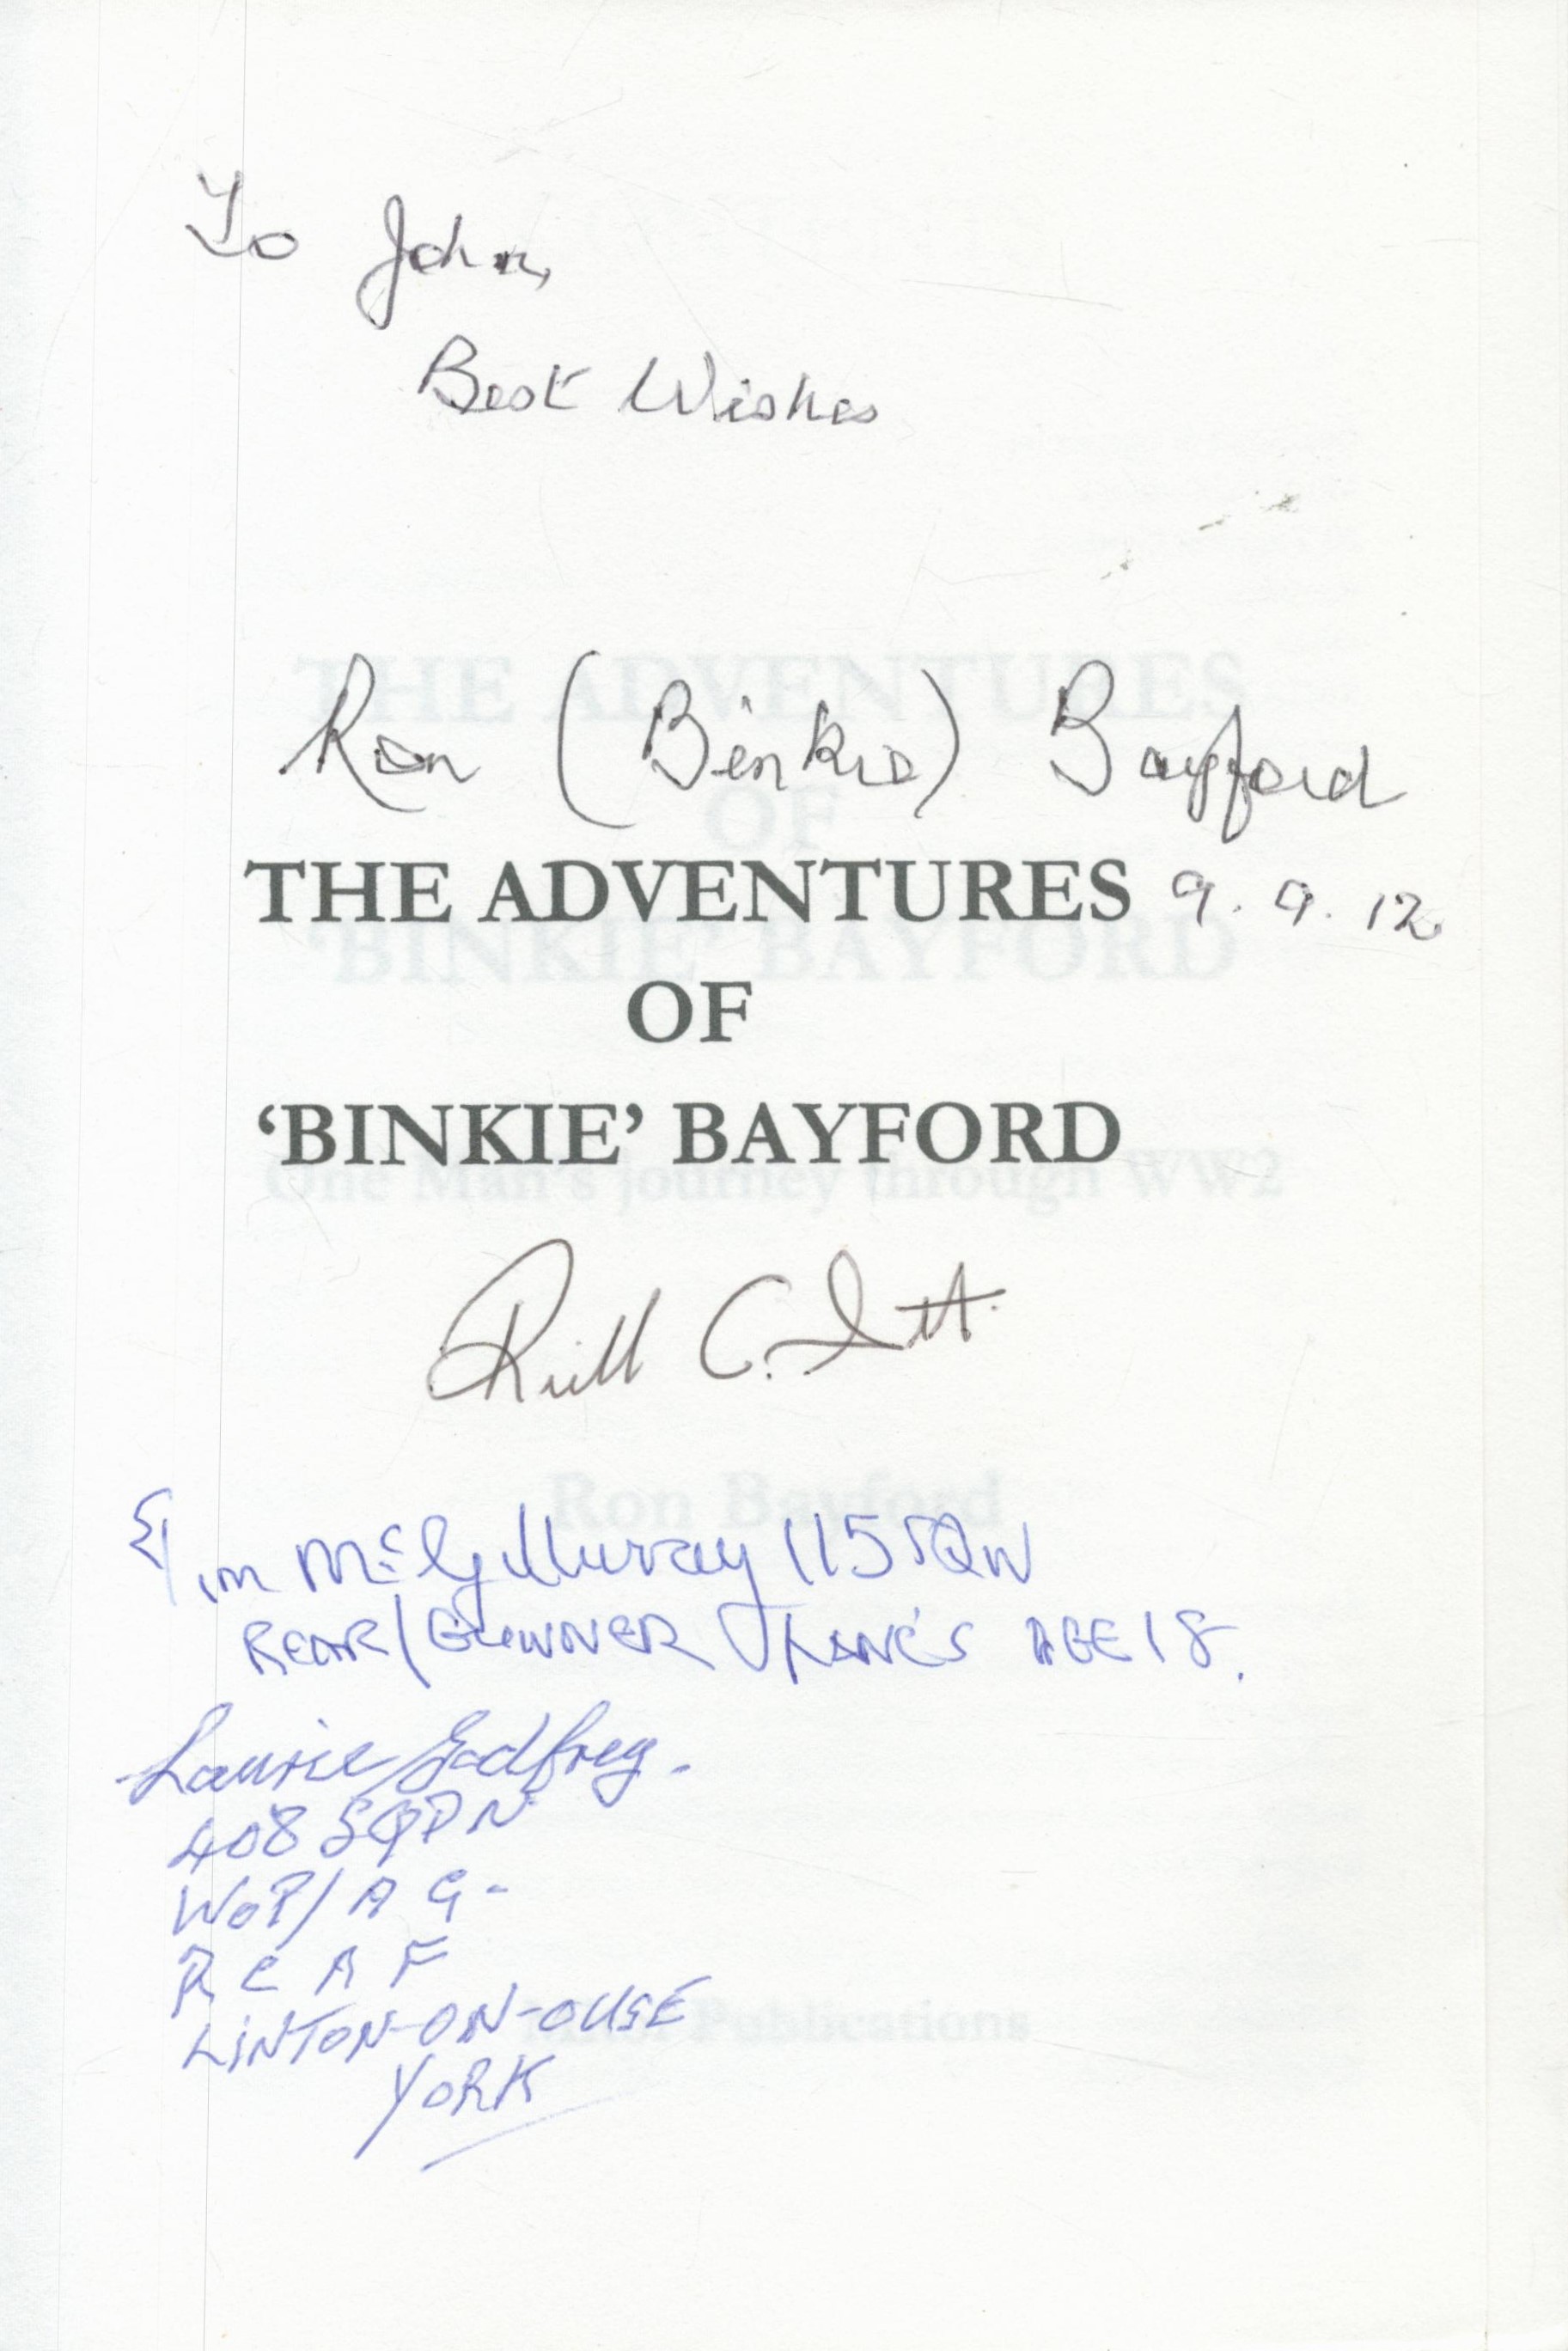 WW2 RAF 4 Signed The Adventures of 'Binkie' Bayford Paperback Book by Richard C Smith. Good - Image 2 of 3